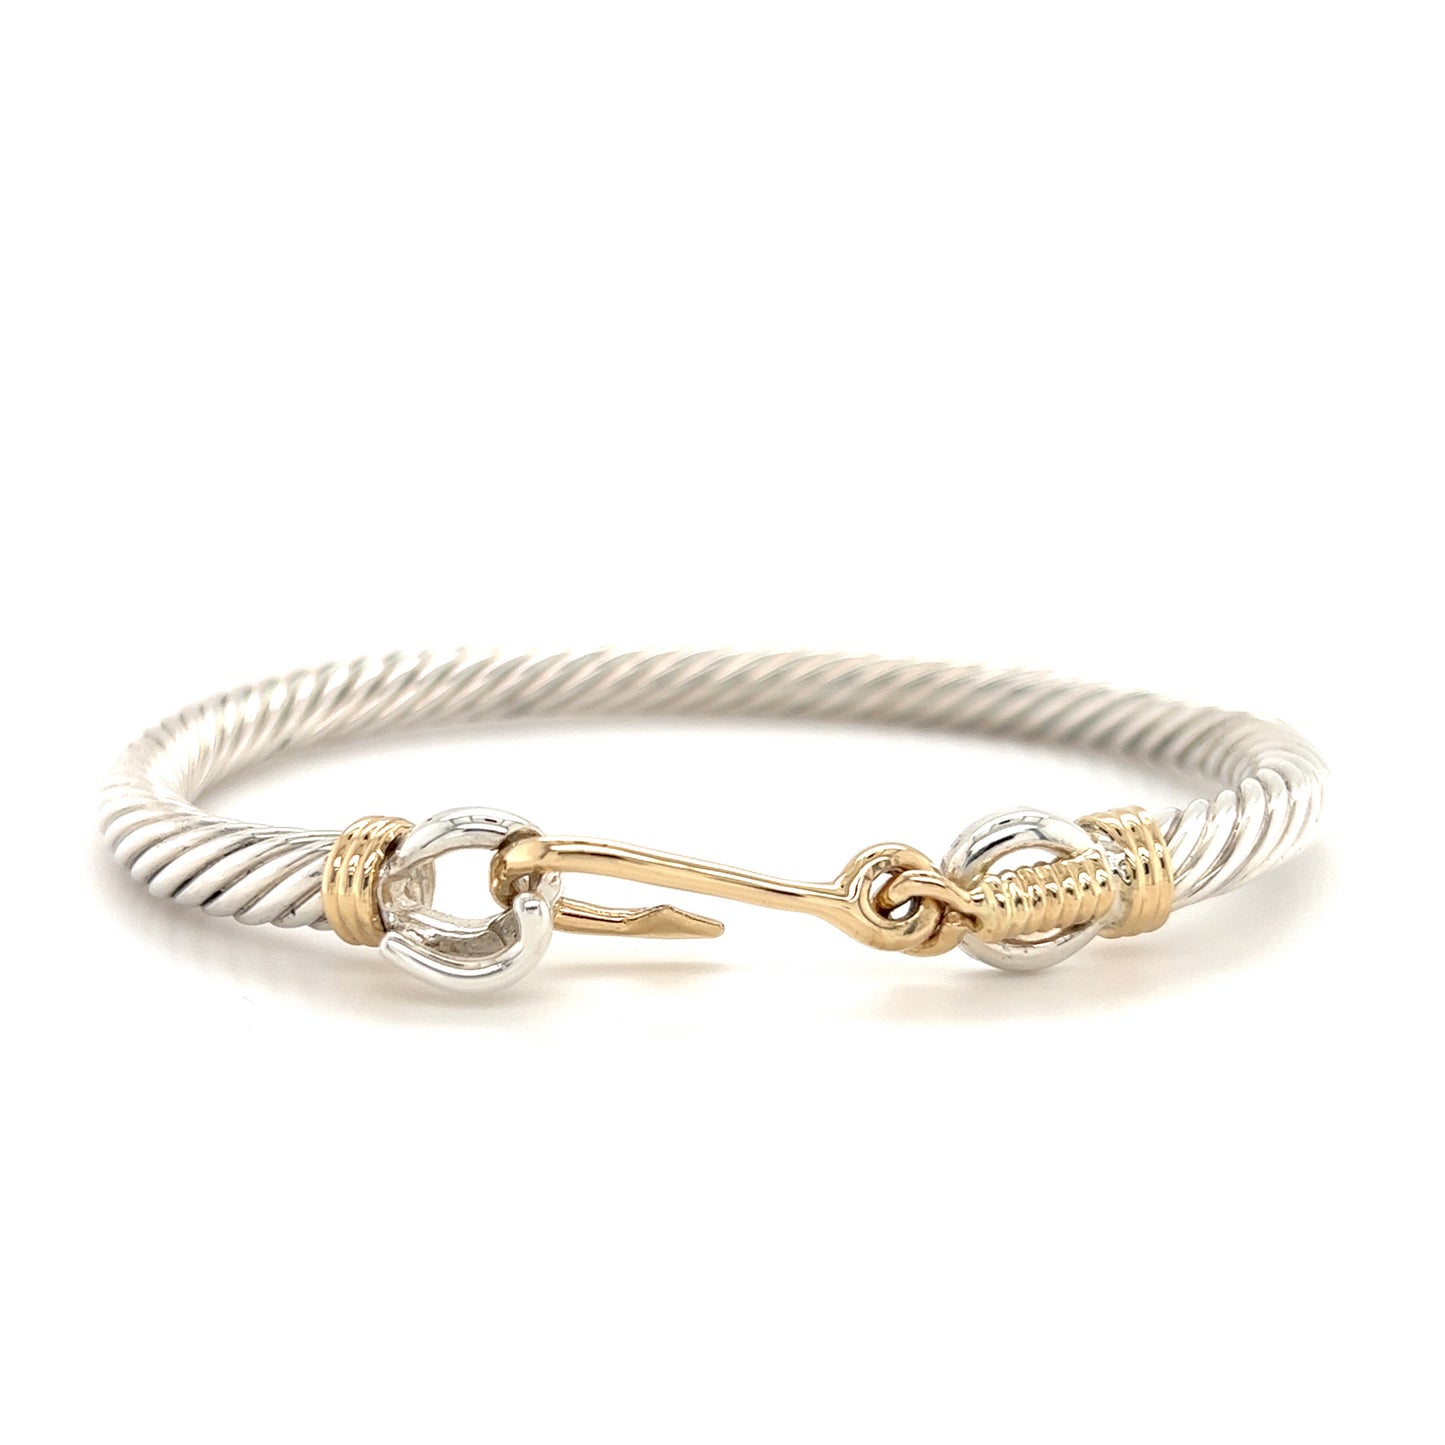 Fish Hook Cable 5mm Bangle Bracelet with 14K Wraps and Clasp in Sterling Silver